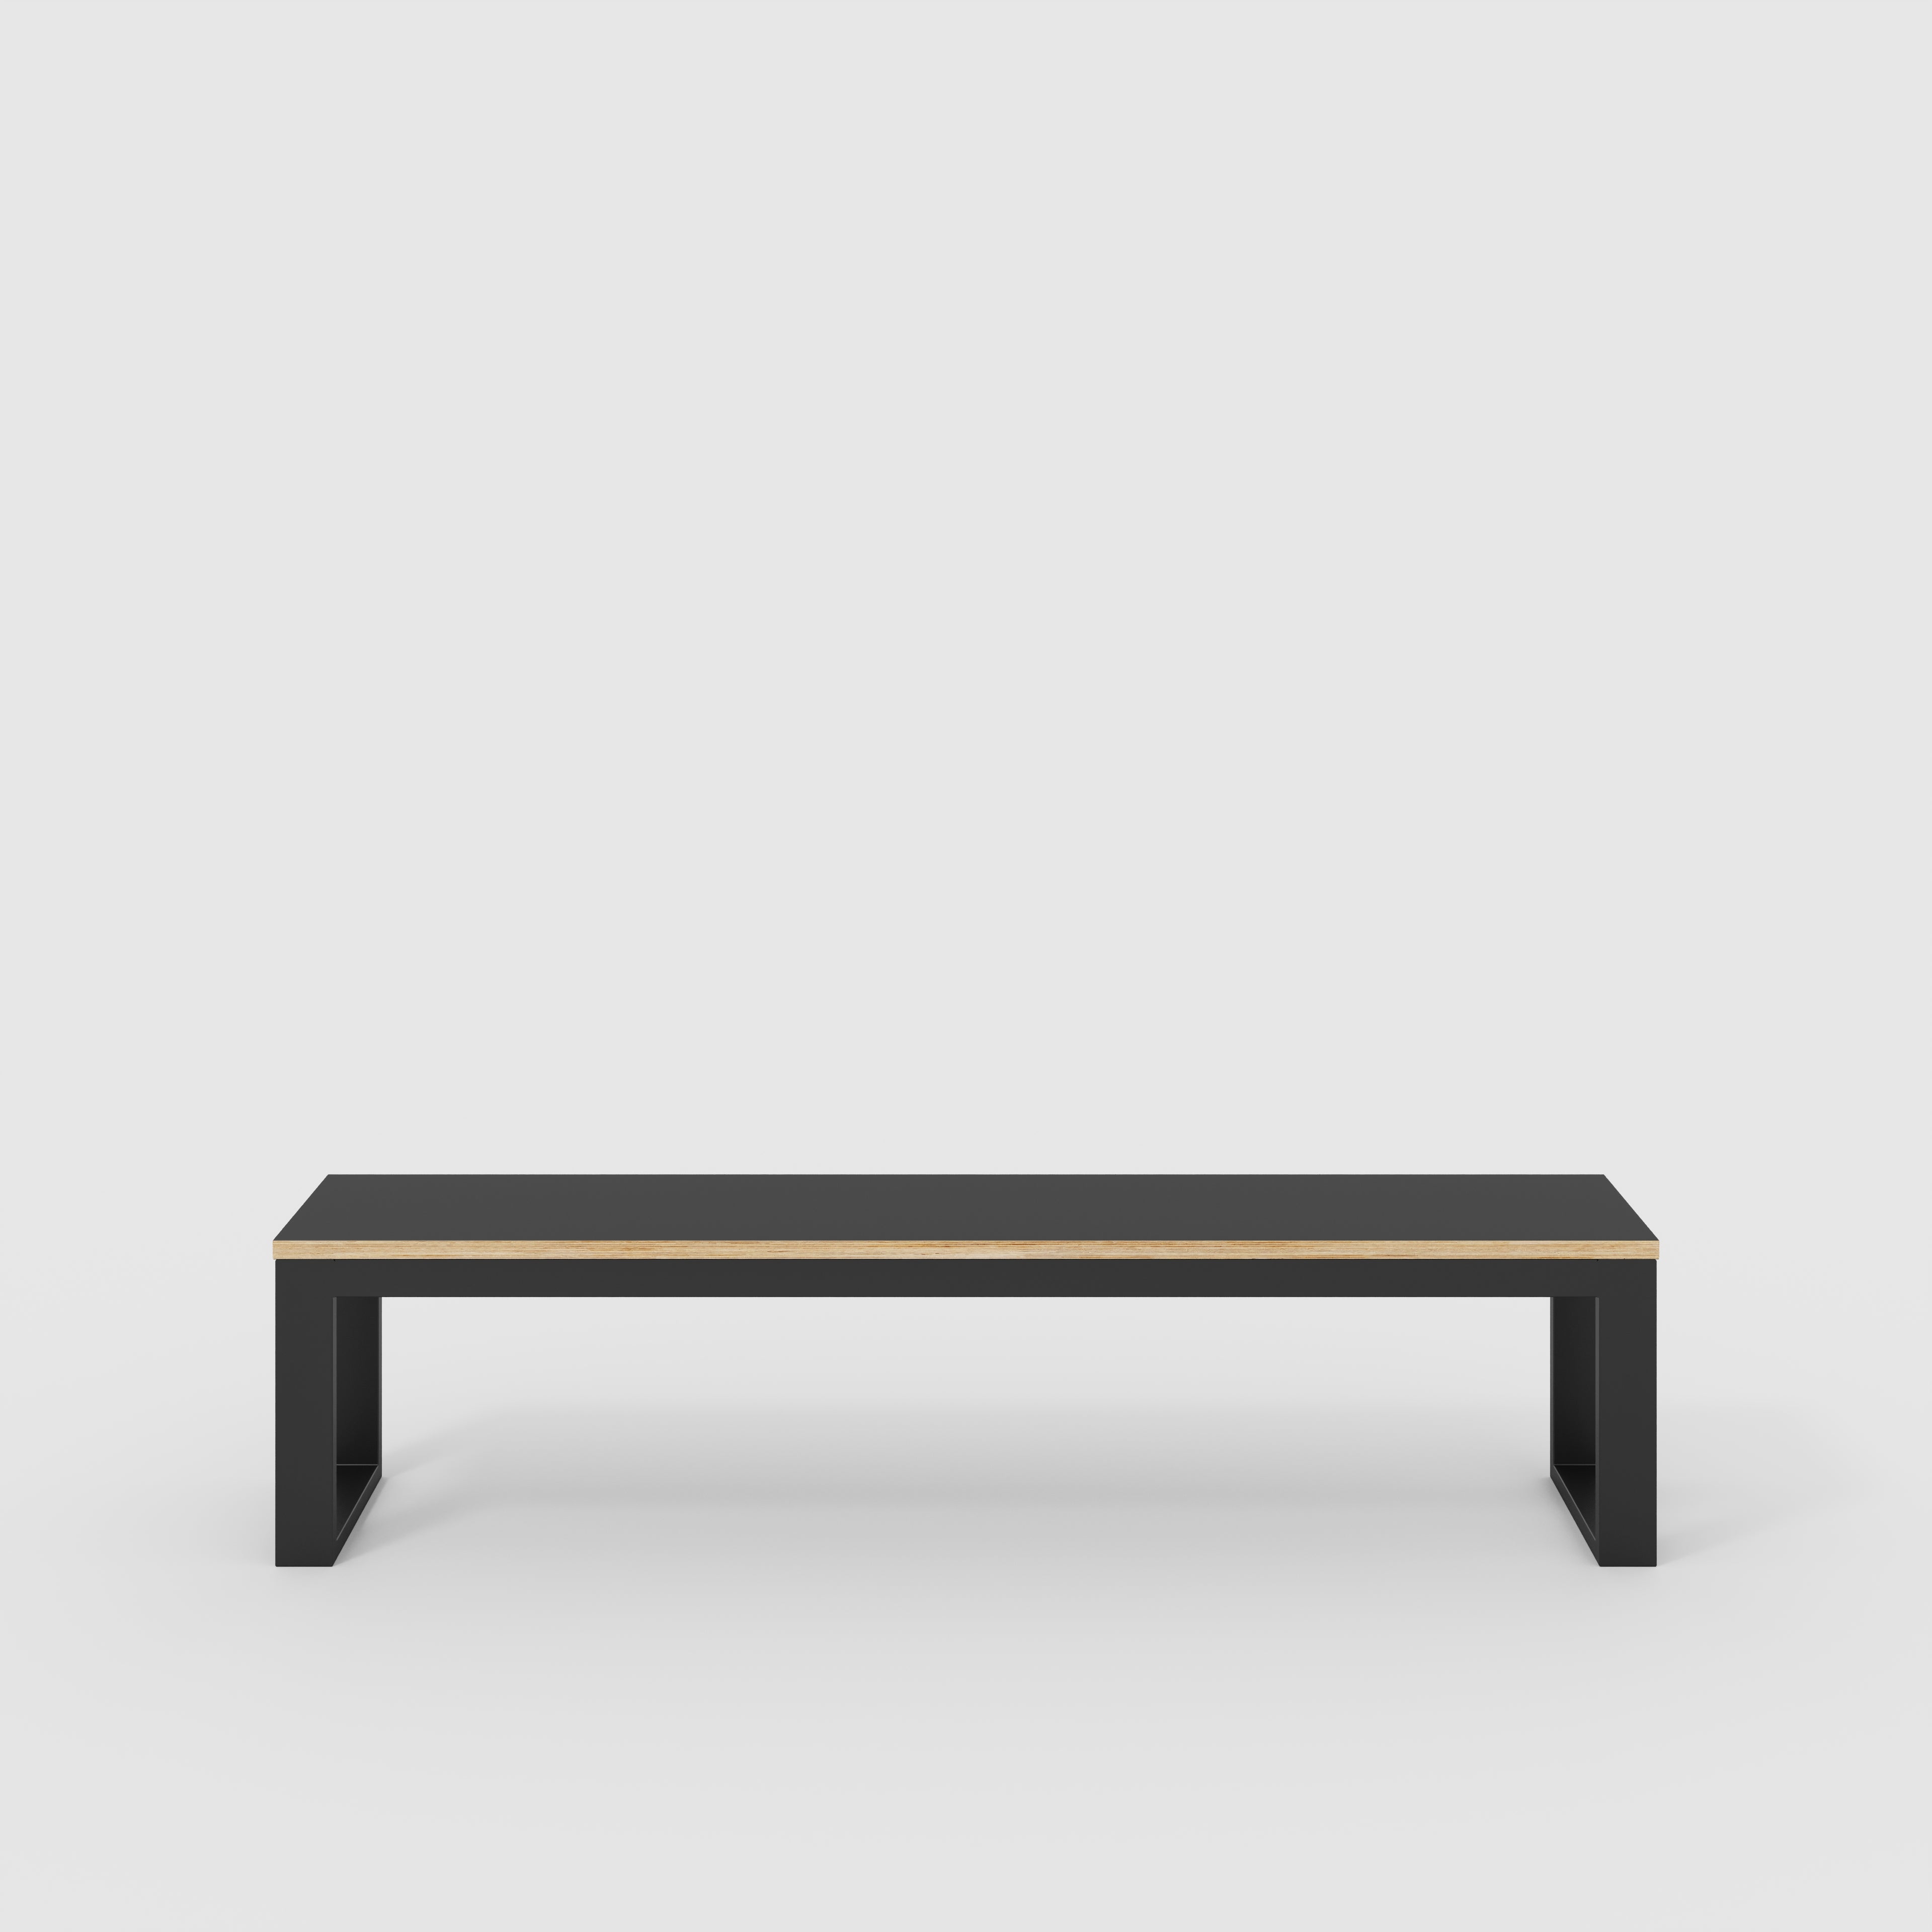 Bench Seat with Black Industrial Frame - Formica Diamond Black - 1800(w) x 325(d)